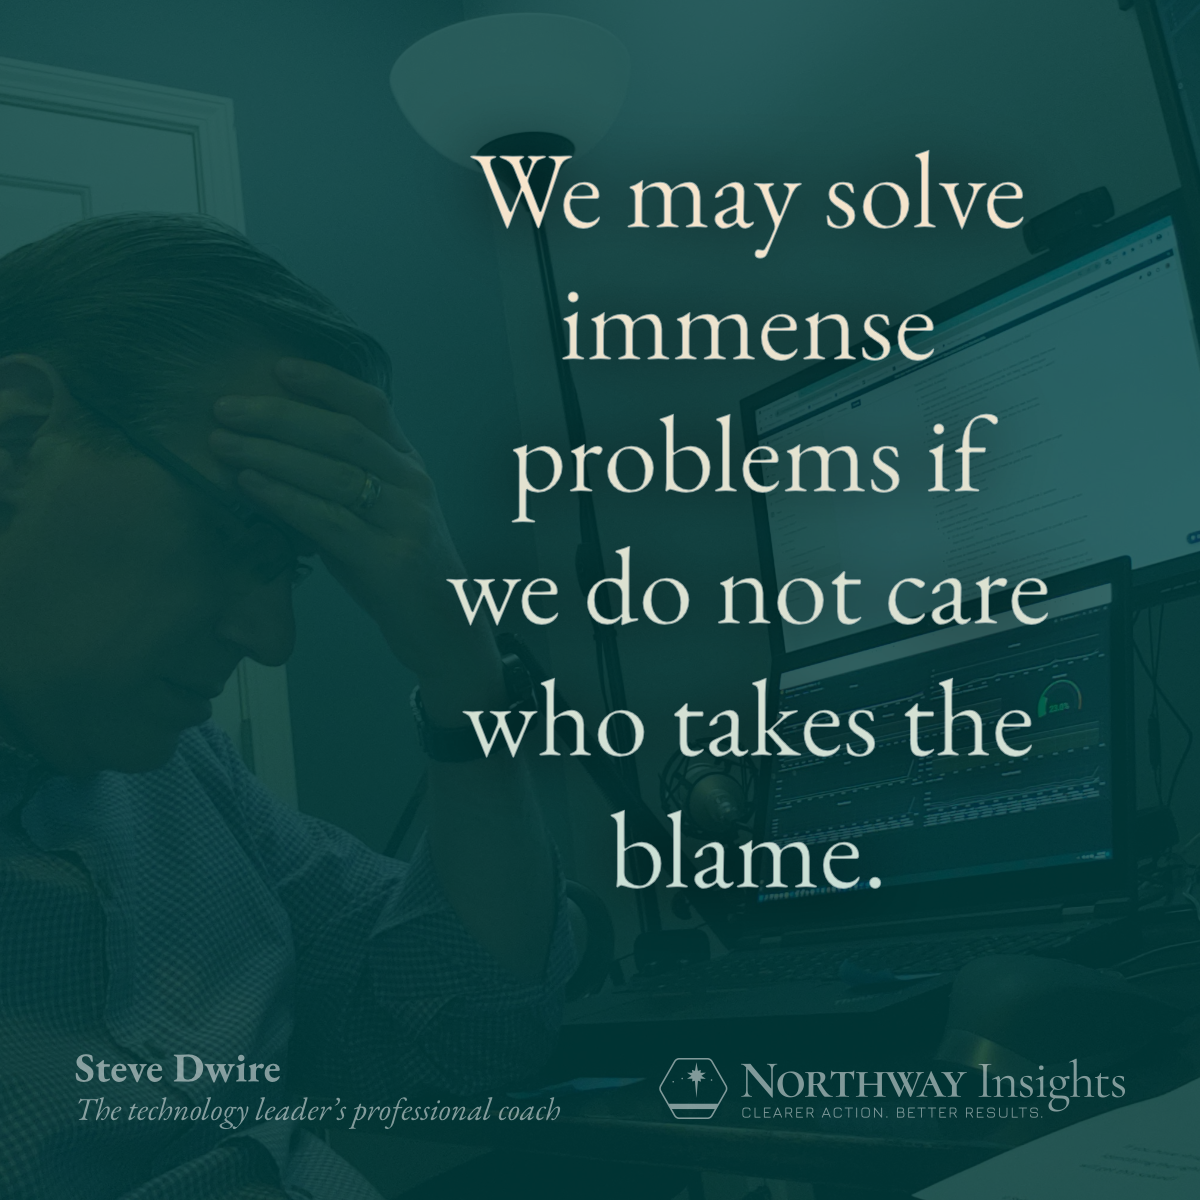 We may solve immense problems if we do not care who takes the blame.